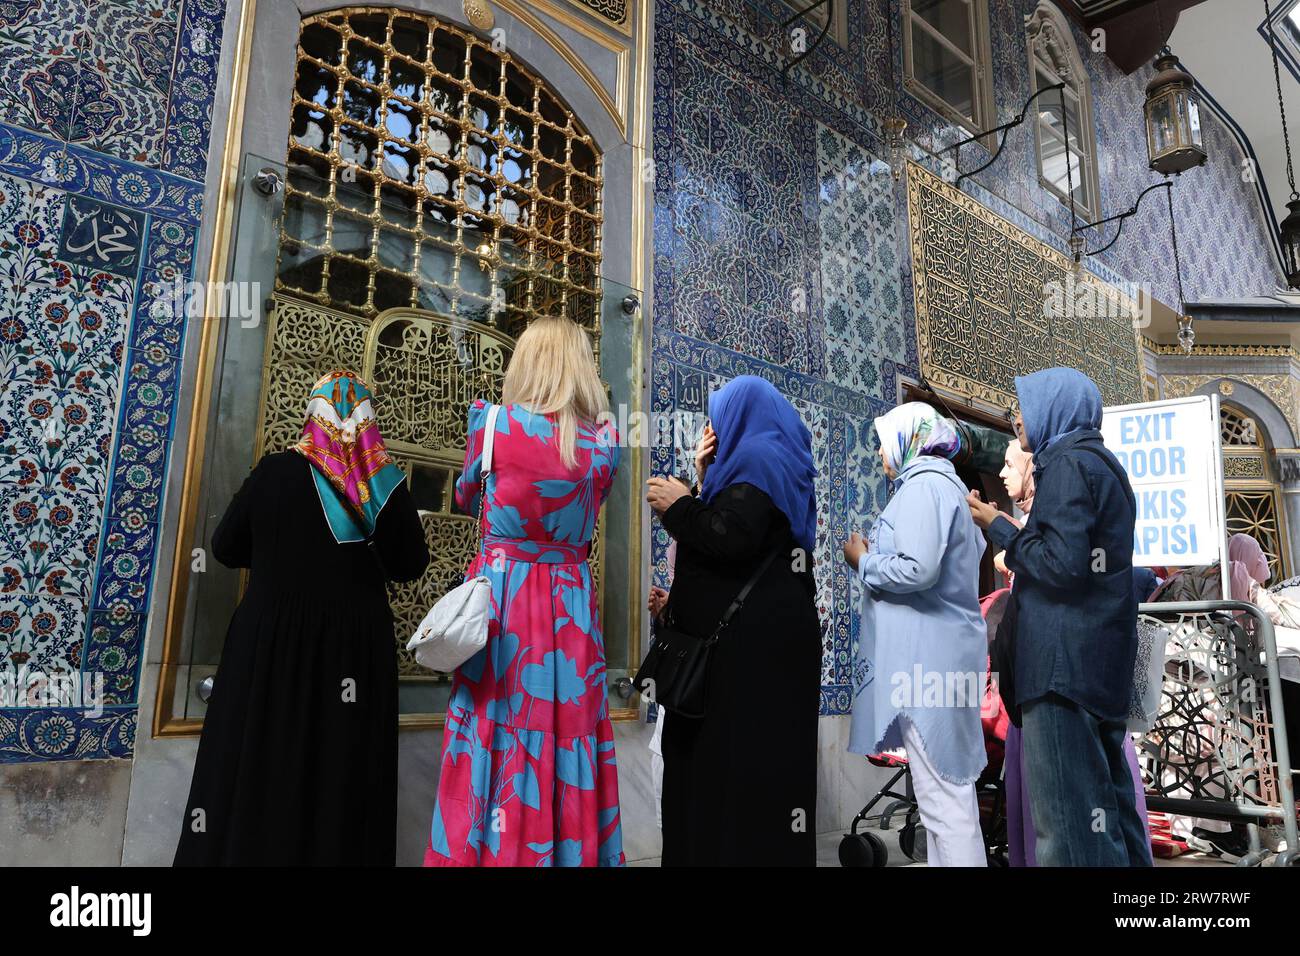 Muslim women praying in front of the tiled wall of the Eyüp Sultan tomb at the Eyüp Sultan Mosque in Istanbul, Turkey Stock Photo